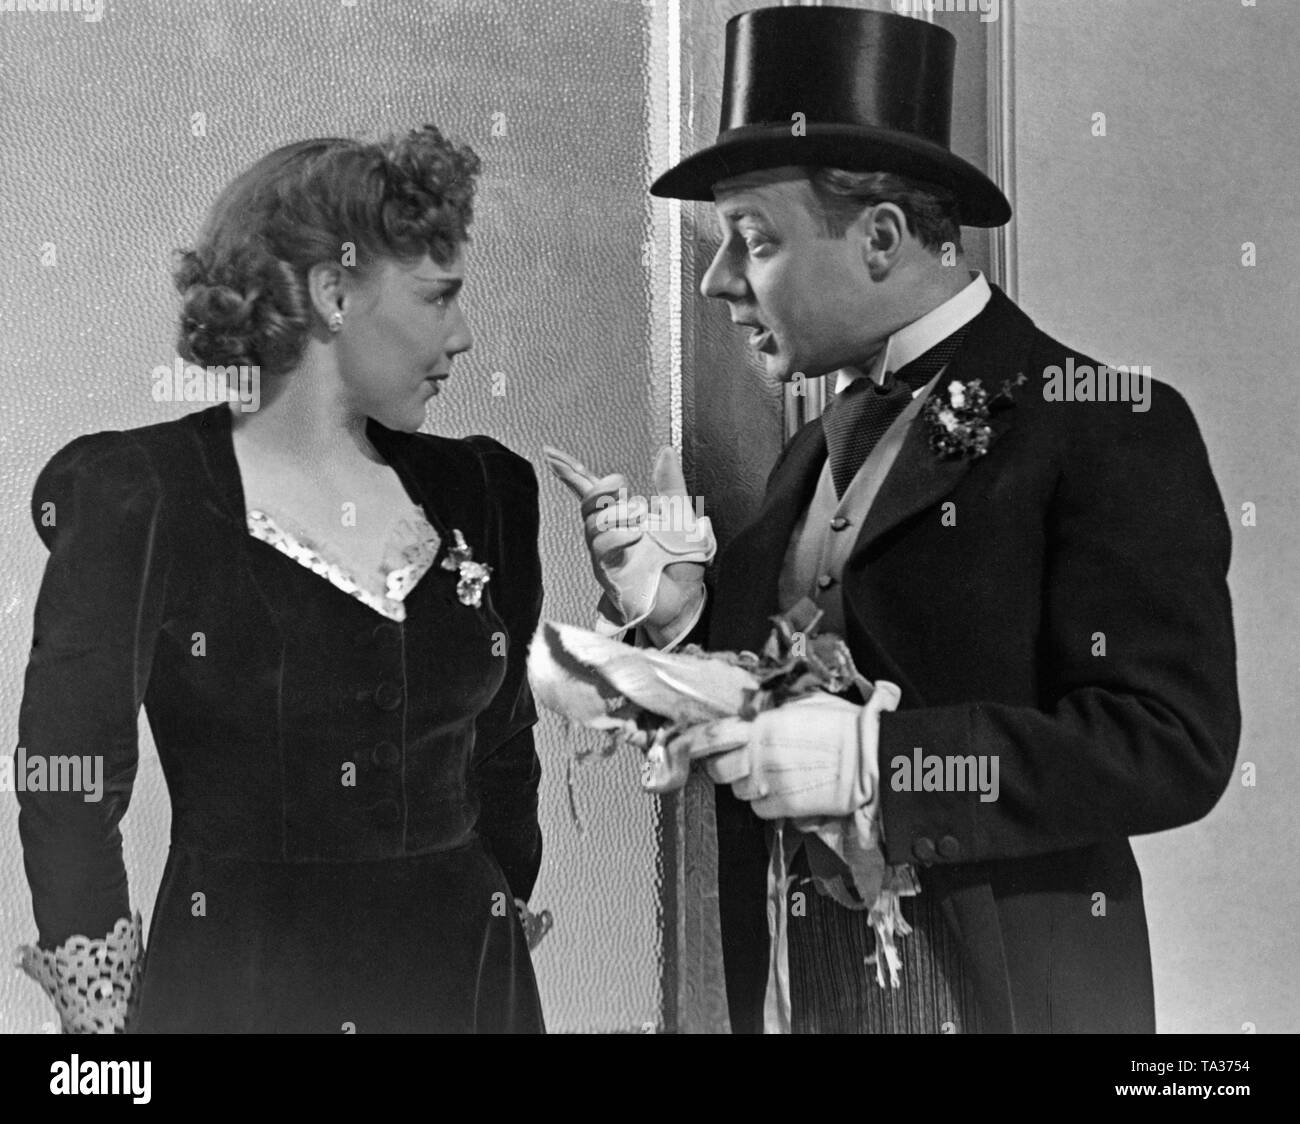 Heinz Ruehmann as Fred Holmes and Alexa von Porembsky as Clara in the  comedy "The Leghorn Hat", directed by Wolfgang Liebeneiner.The comedy is  based on the play "The Italian Straw Hat" by